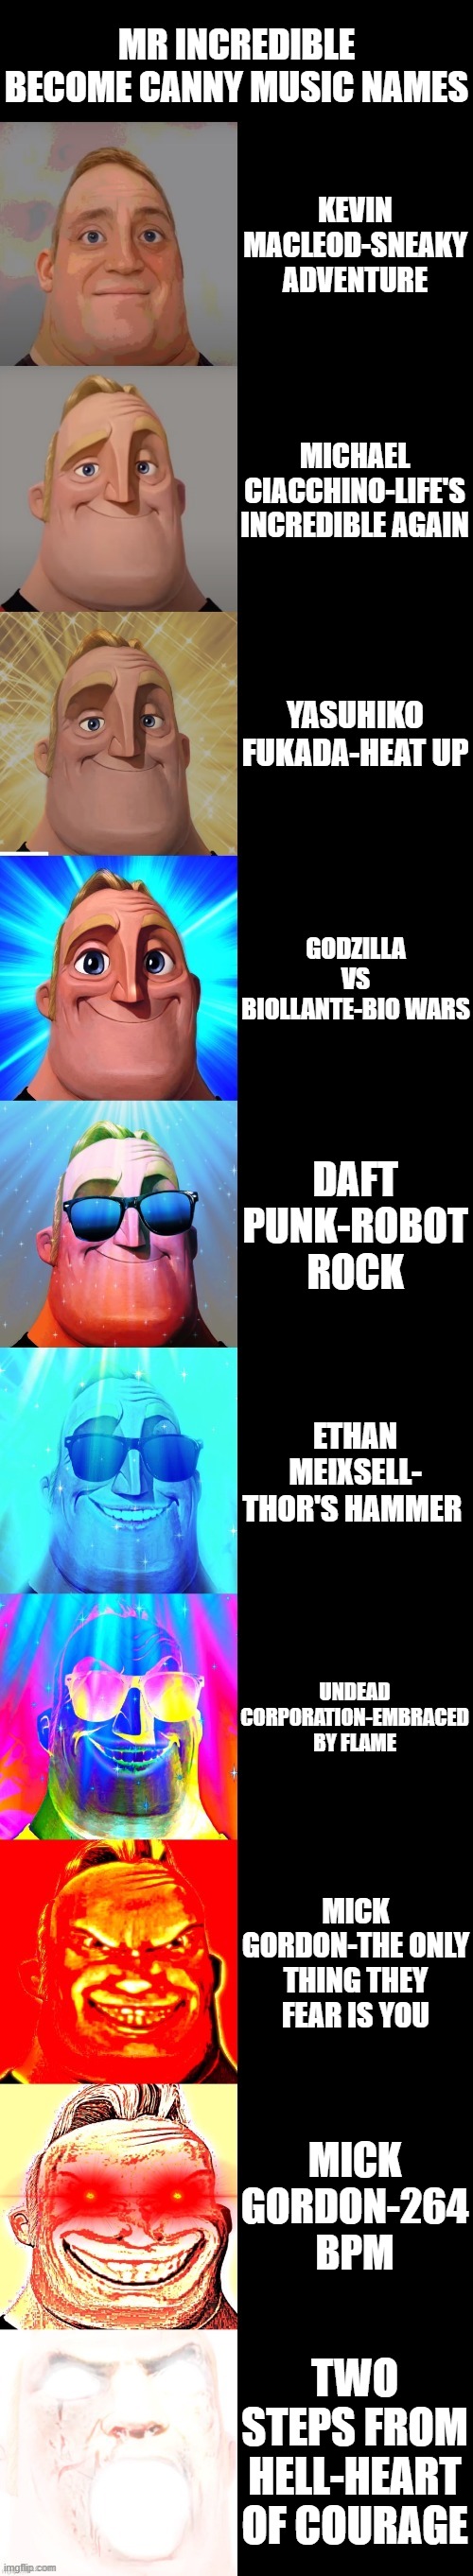 mr incredible becoming canny | MR INCREDIBLE BECOME CANNY MUSIC NAMES; KEVIN MACLEOD-SNEAKY ADVENTURE; MICHAEL CIACCHINO-LIFE'S INCREDIBLE AGAIN; YASUHIKO FUKADA-HEAT UP; GODZILLA VS BIOLLANTE-BIO WARS; DAFT PUNK-ROBOT ROCK; ETHAN MEIXSELL- THOR'S HAMMER; UNDEAD CORPORATION-EMBRACED BY FLAME; MICK GORDON-THE ONLY THING THEY FEAR IS YOU; MICK GORDON-264 BPM; TWO STEPS FROM HELL-HEART OF COURAGE | image tagged in mr incredible becoming canny | made w/ Imgflip meme maker